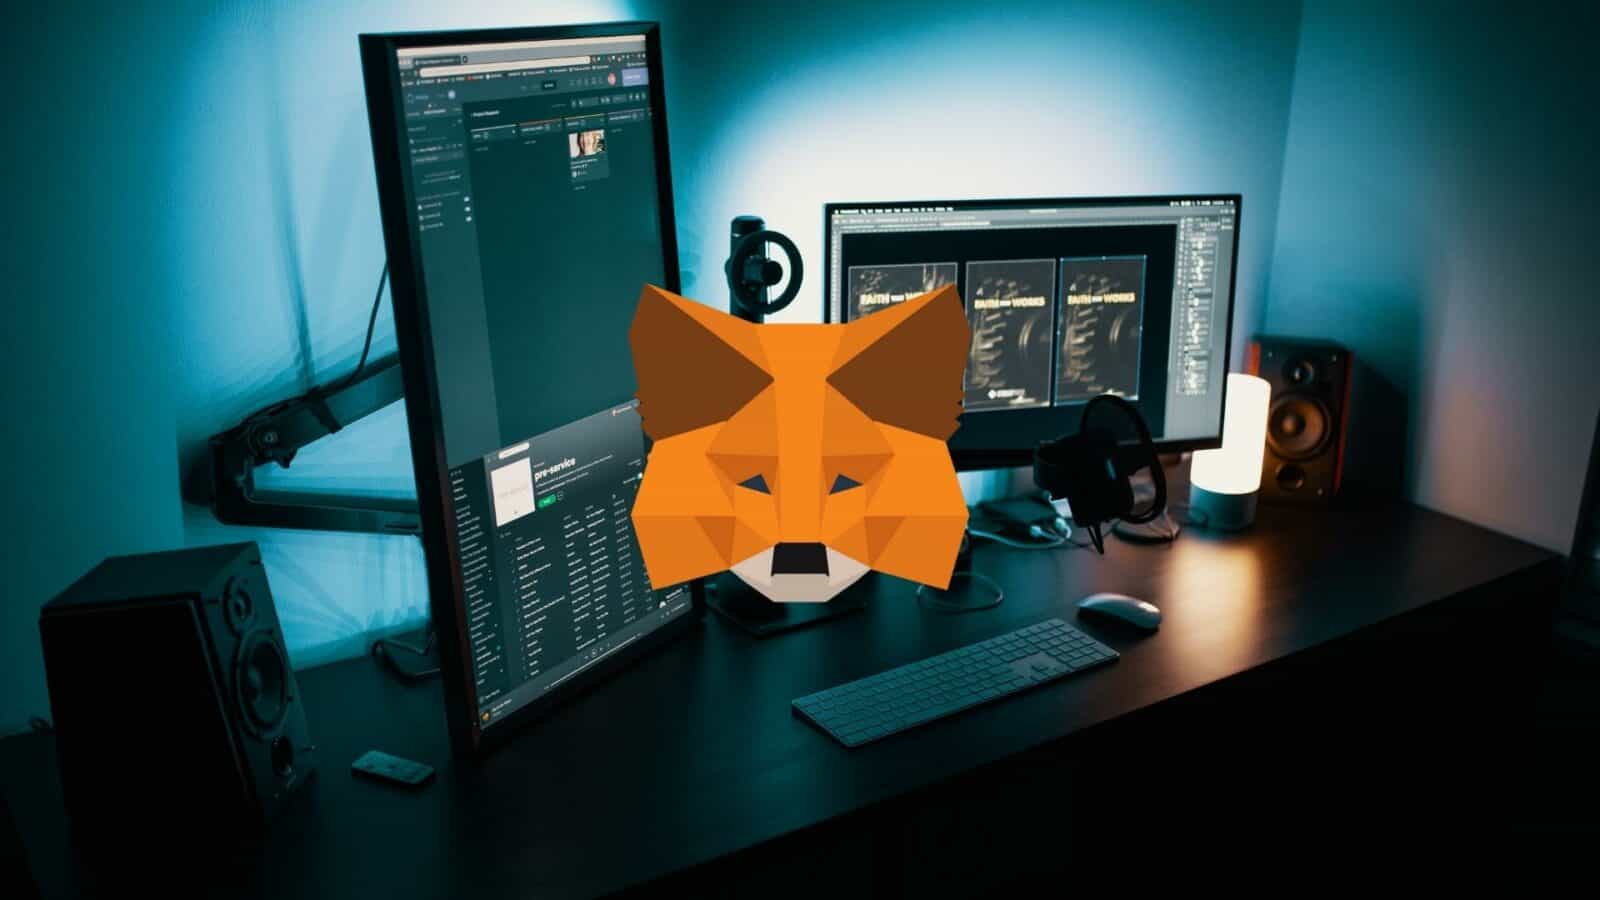 The vastly used crypto walled worldwide, Metamask, announced that it will launch its own Web3 game launcher with blockchain DAO Game7 called HyperPlay.